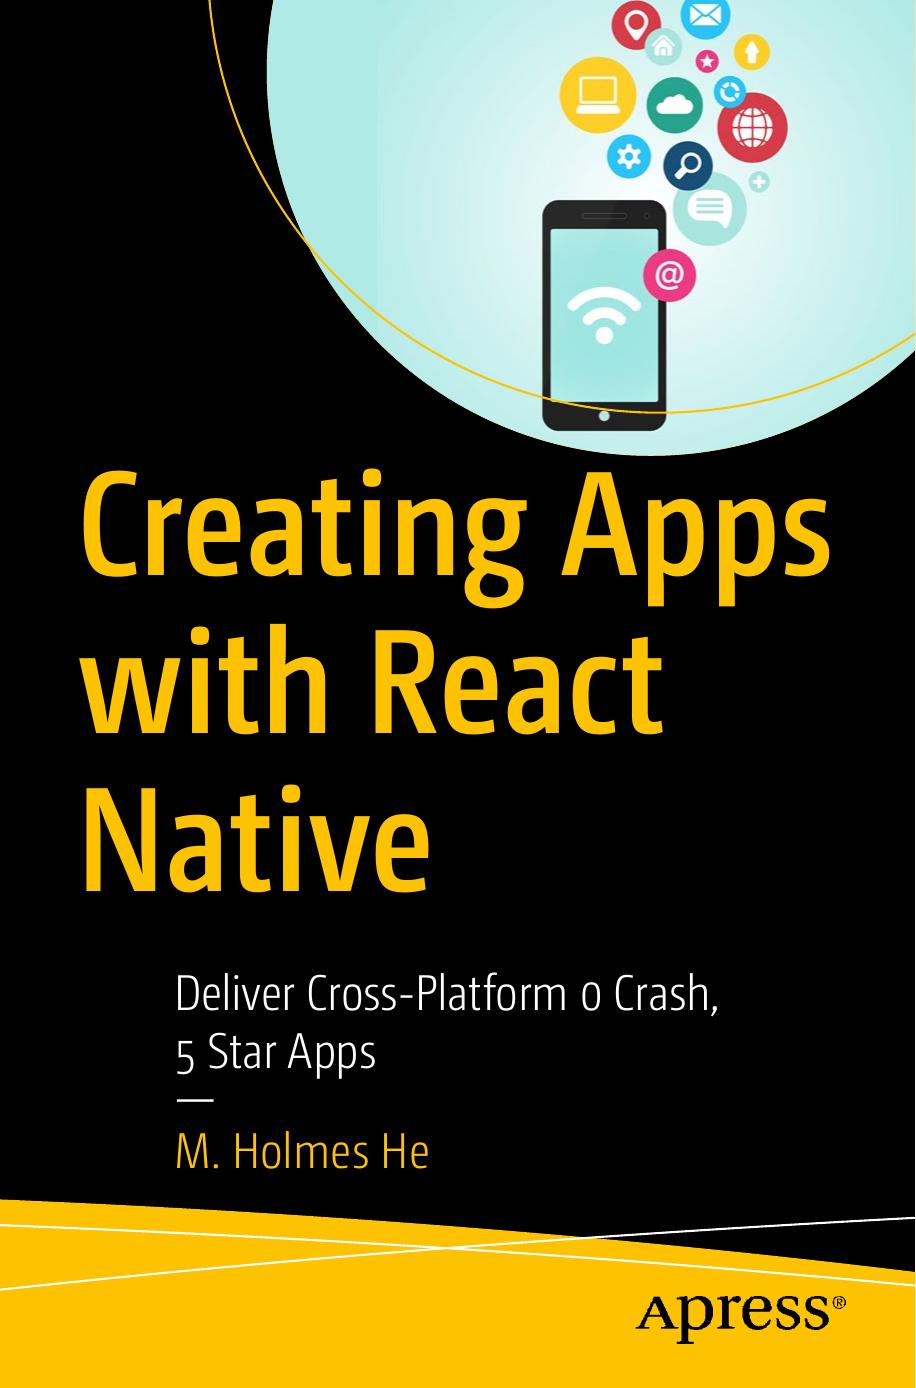 Creating Apps with React Native Deliver Cross-Platform 0 Crash, 5 Star Apps